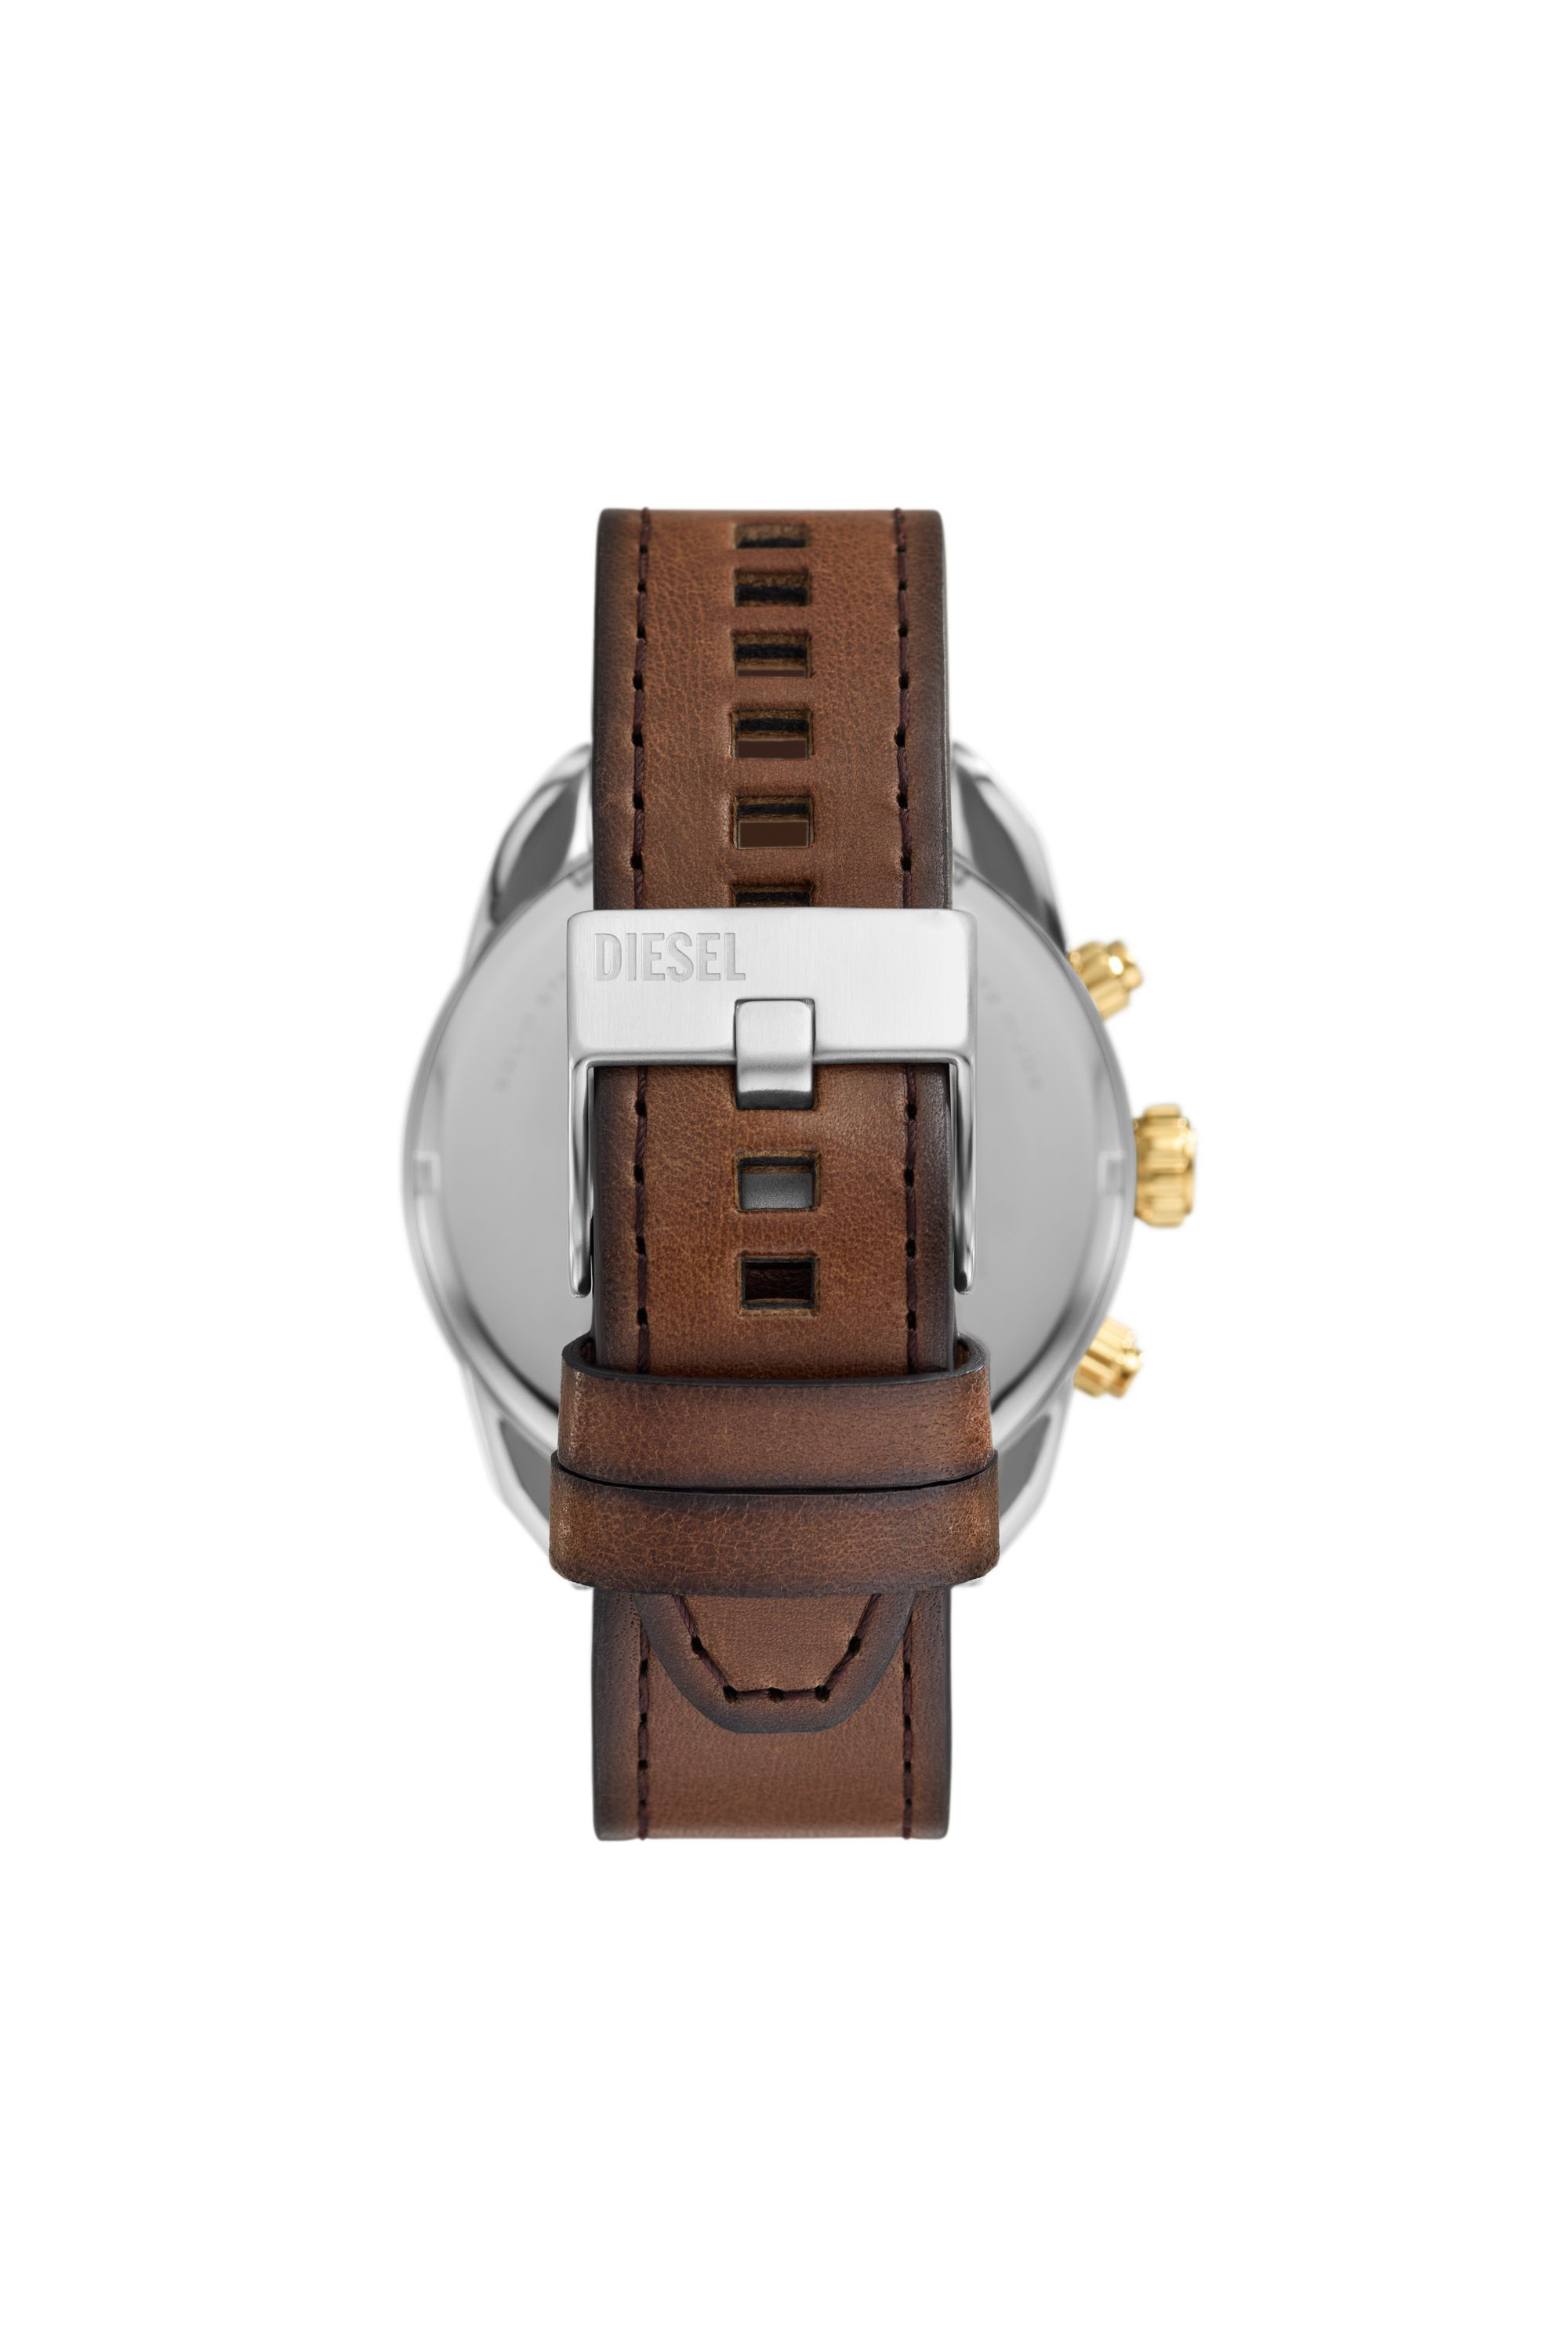 Diesel - DZ4665, Male Spiked chronograph brown leather watch in ブラウン - Image 2